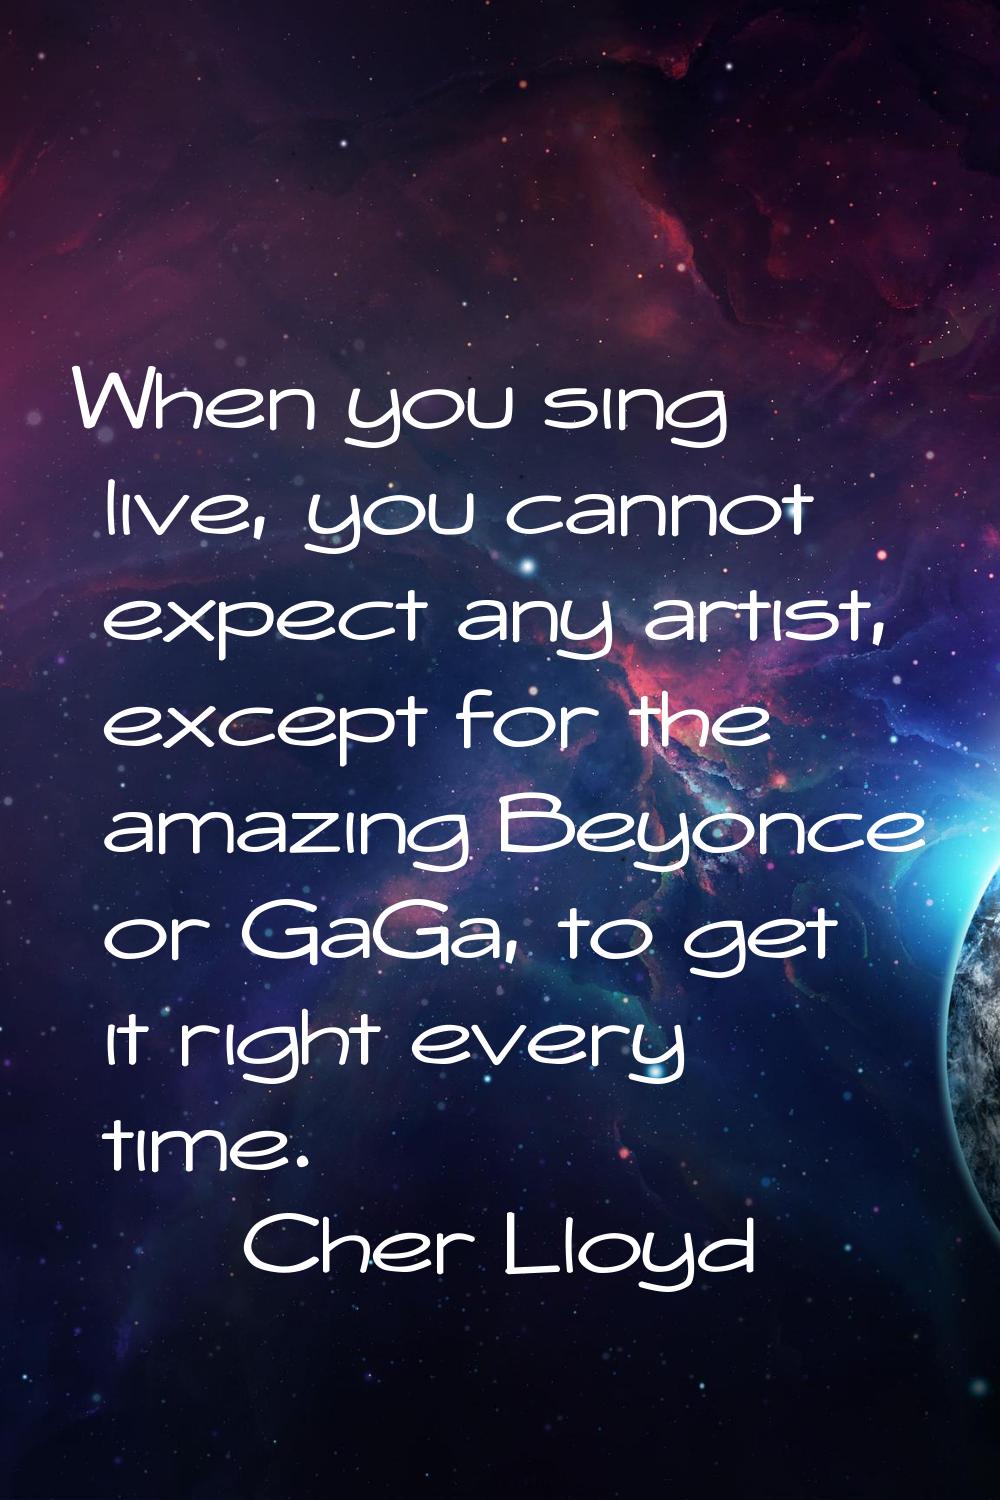 When you sing live, you cannot expect any artist, except for the amazing Beyonce or GaGa, to get it